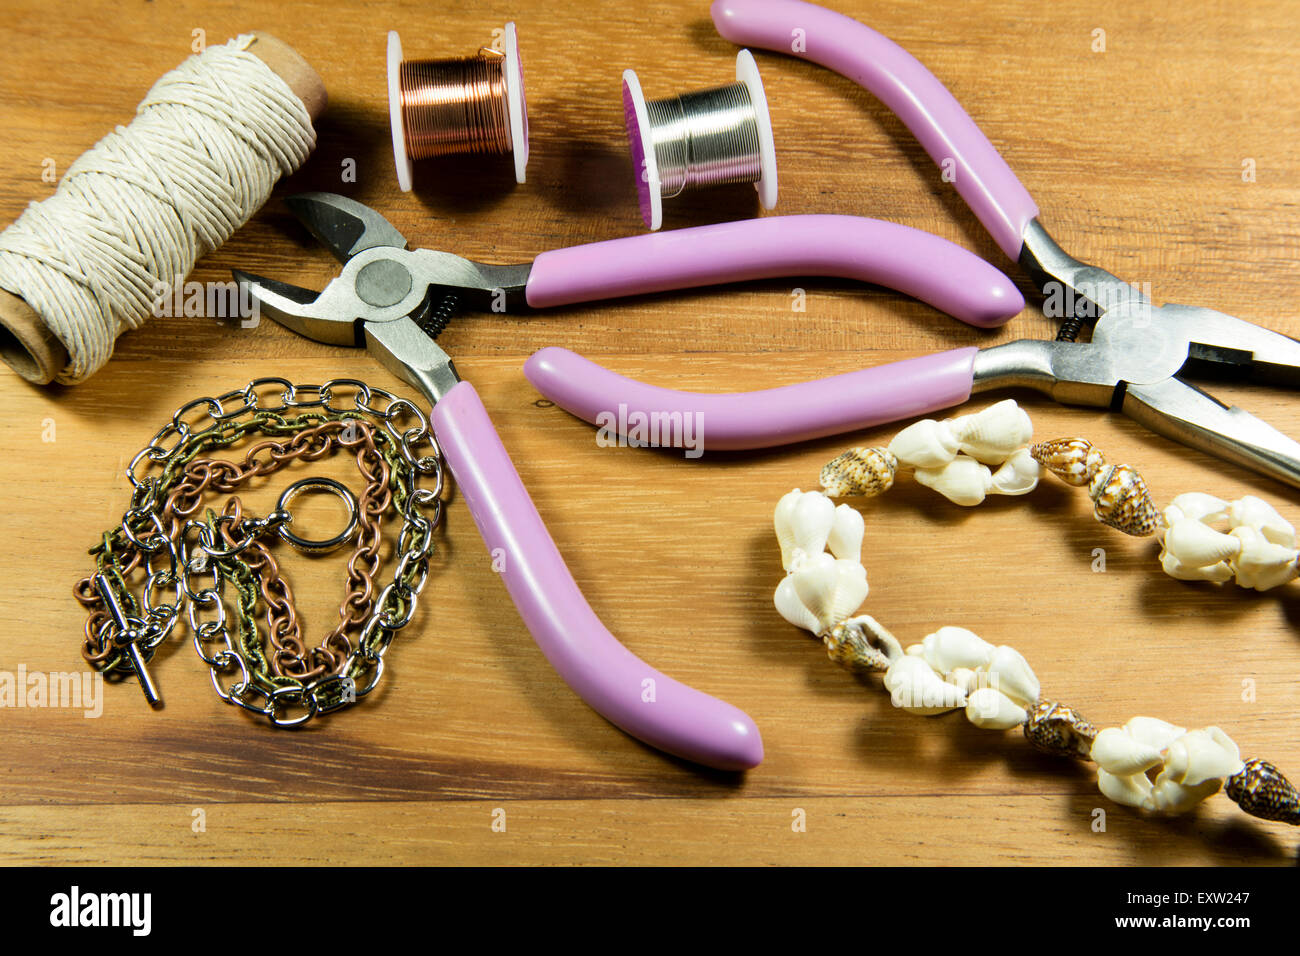 Various craft tools used to make jewelry from wire and beads Stock Photo